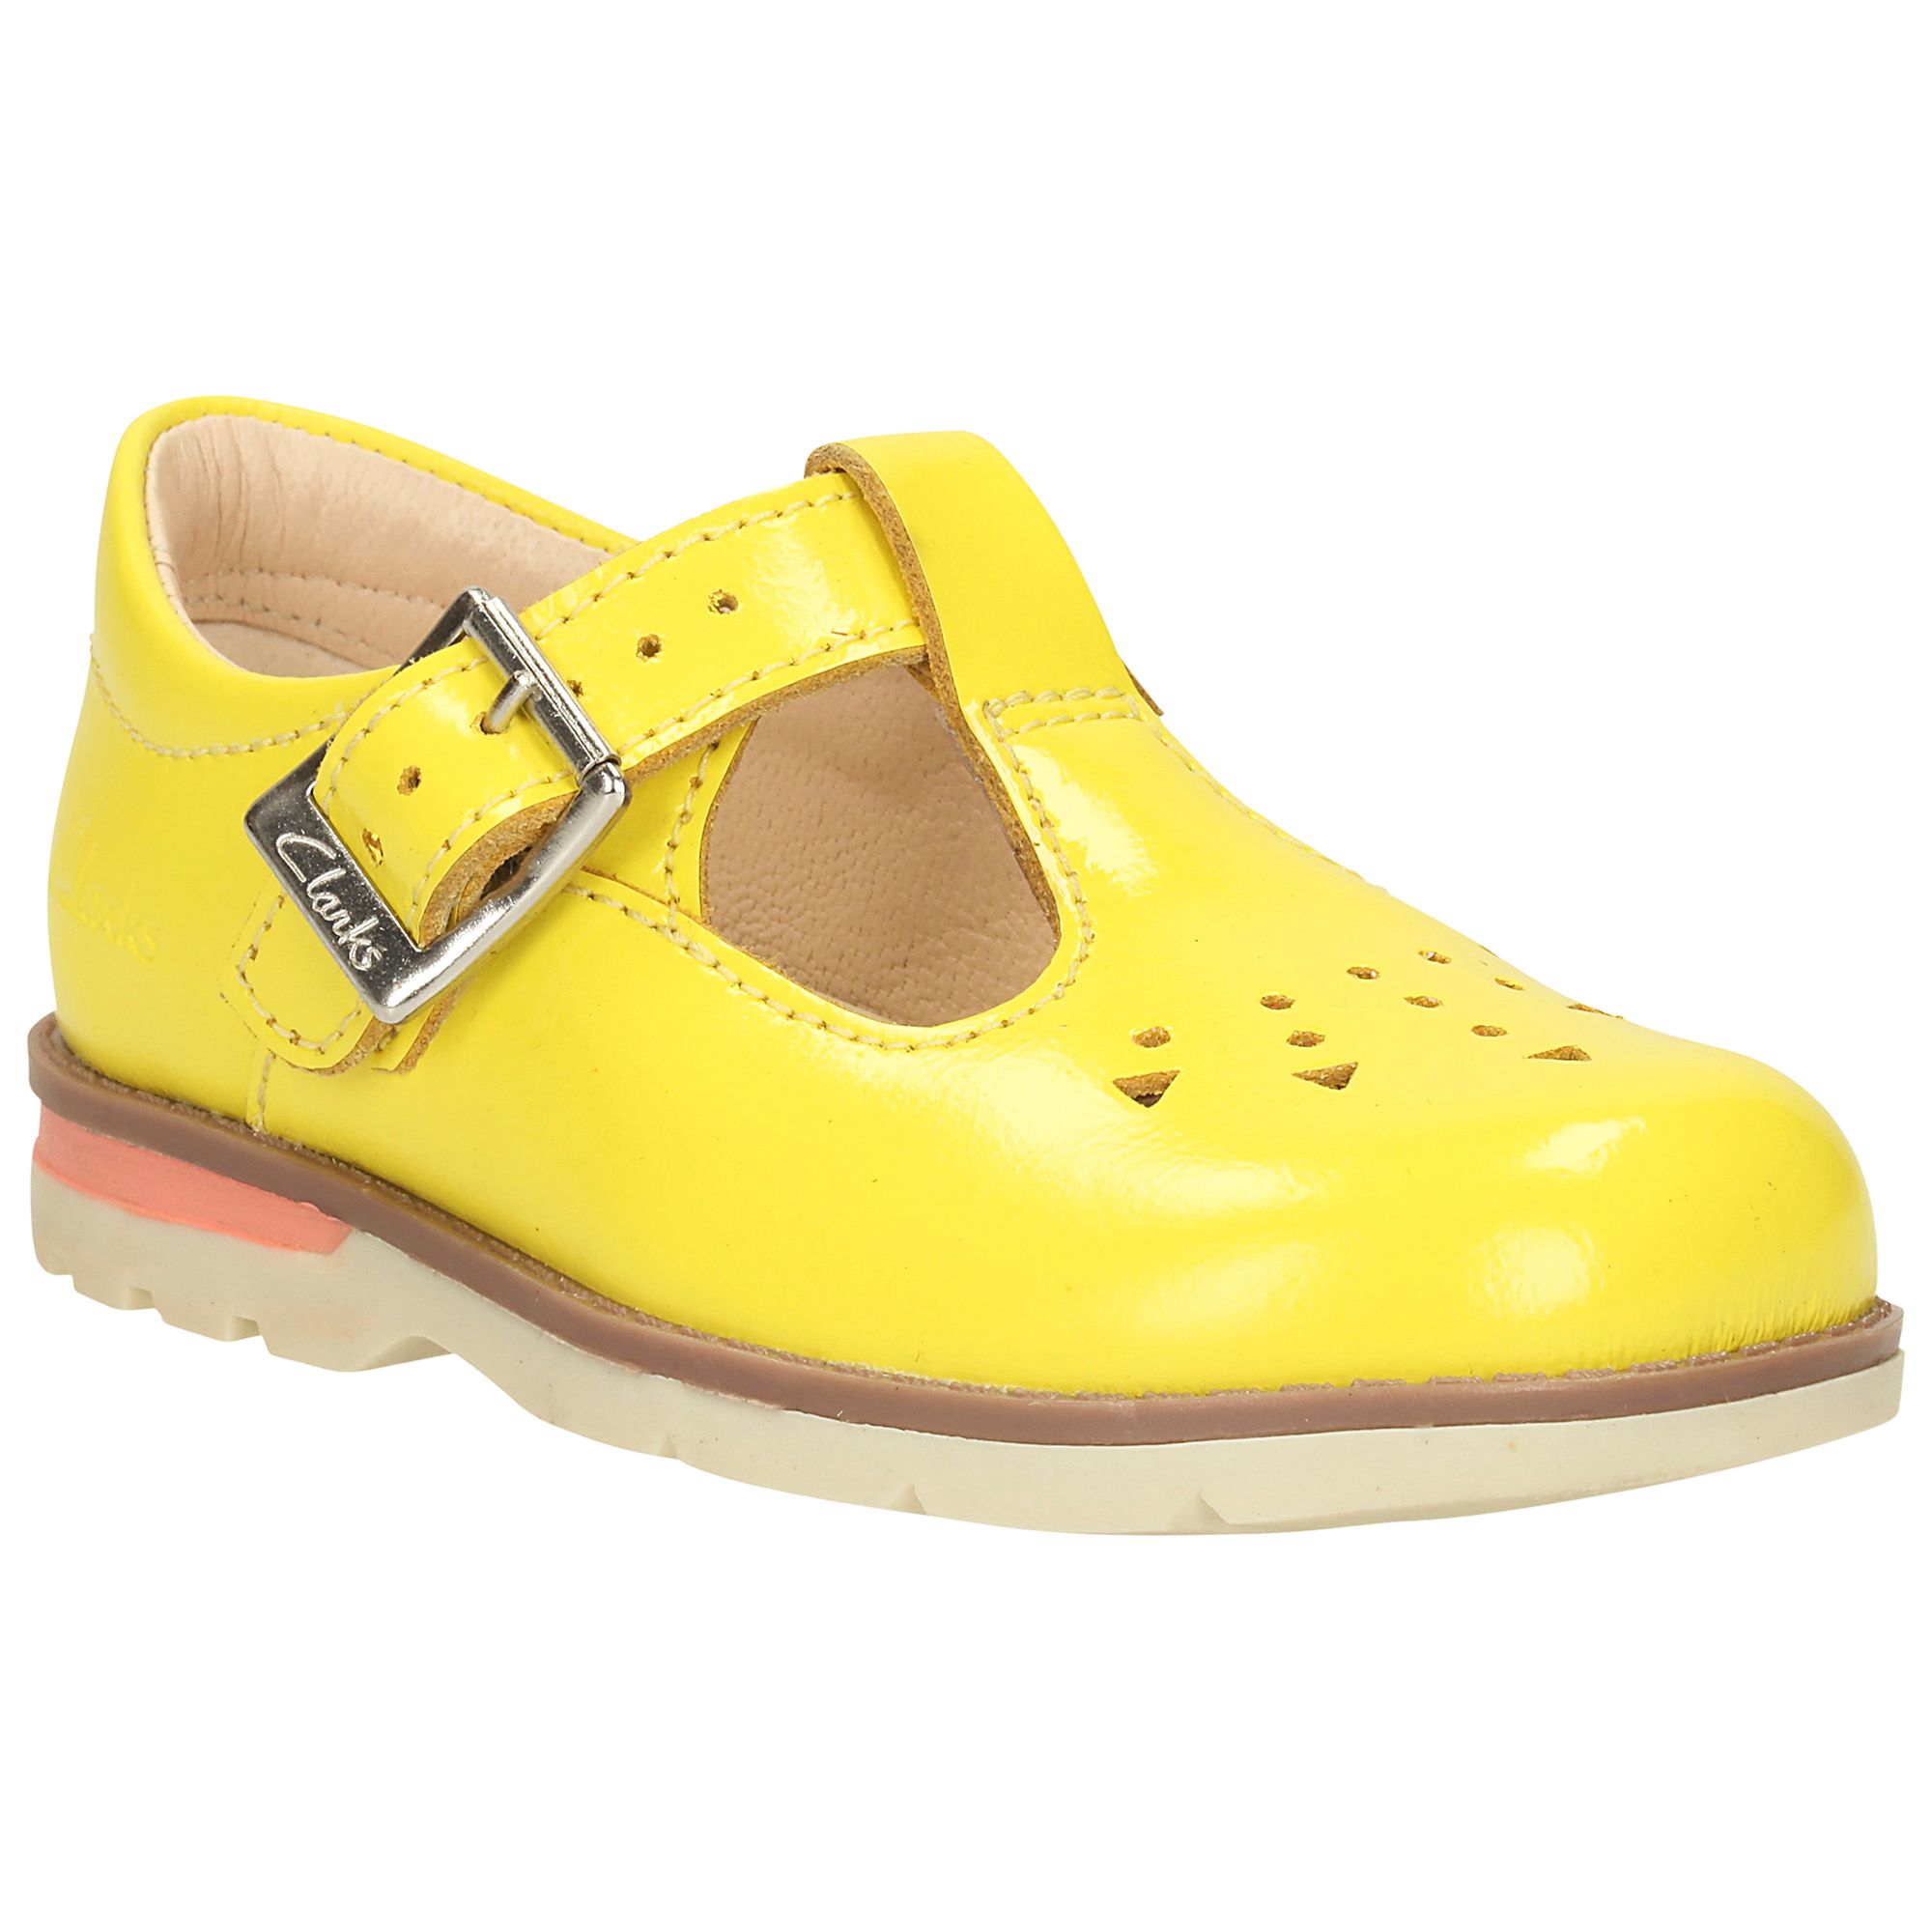 clarks shoes yellow